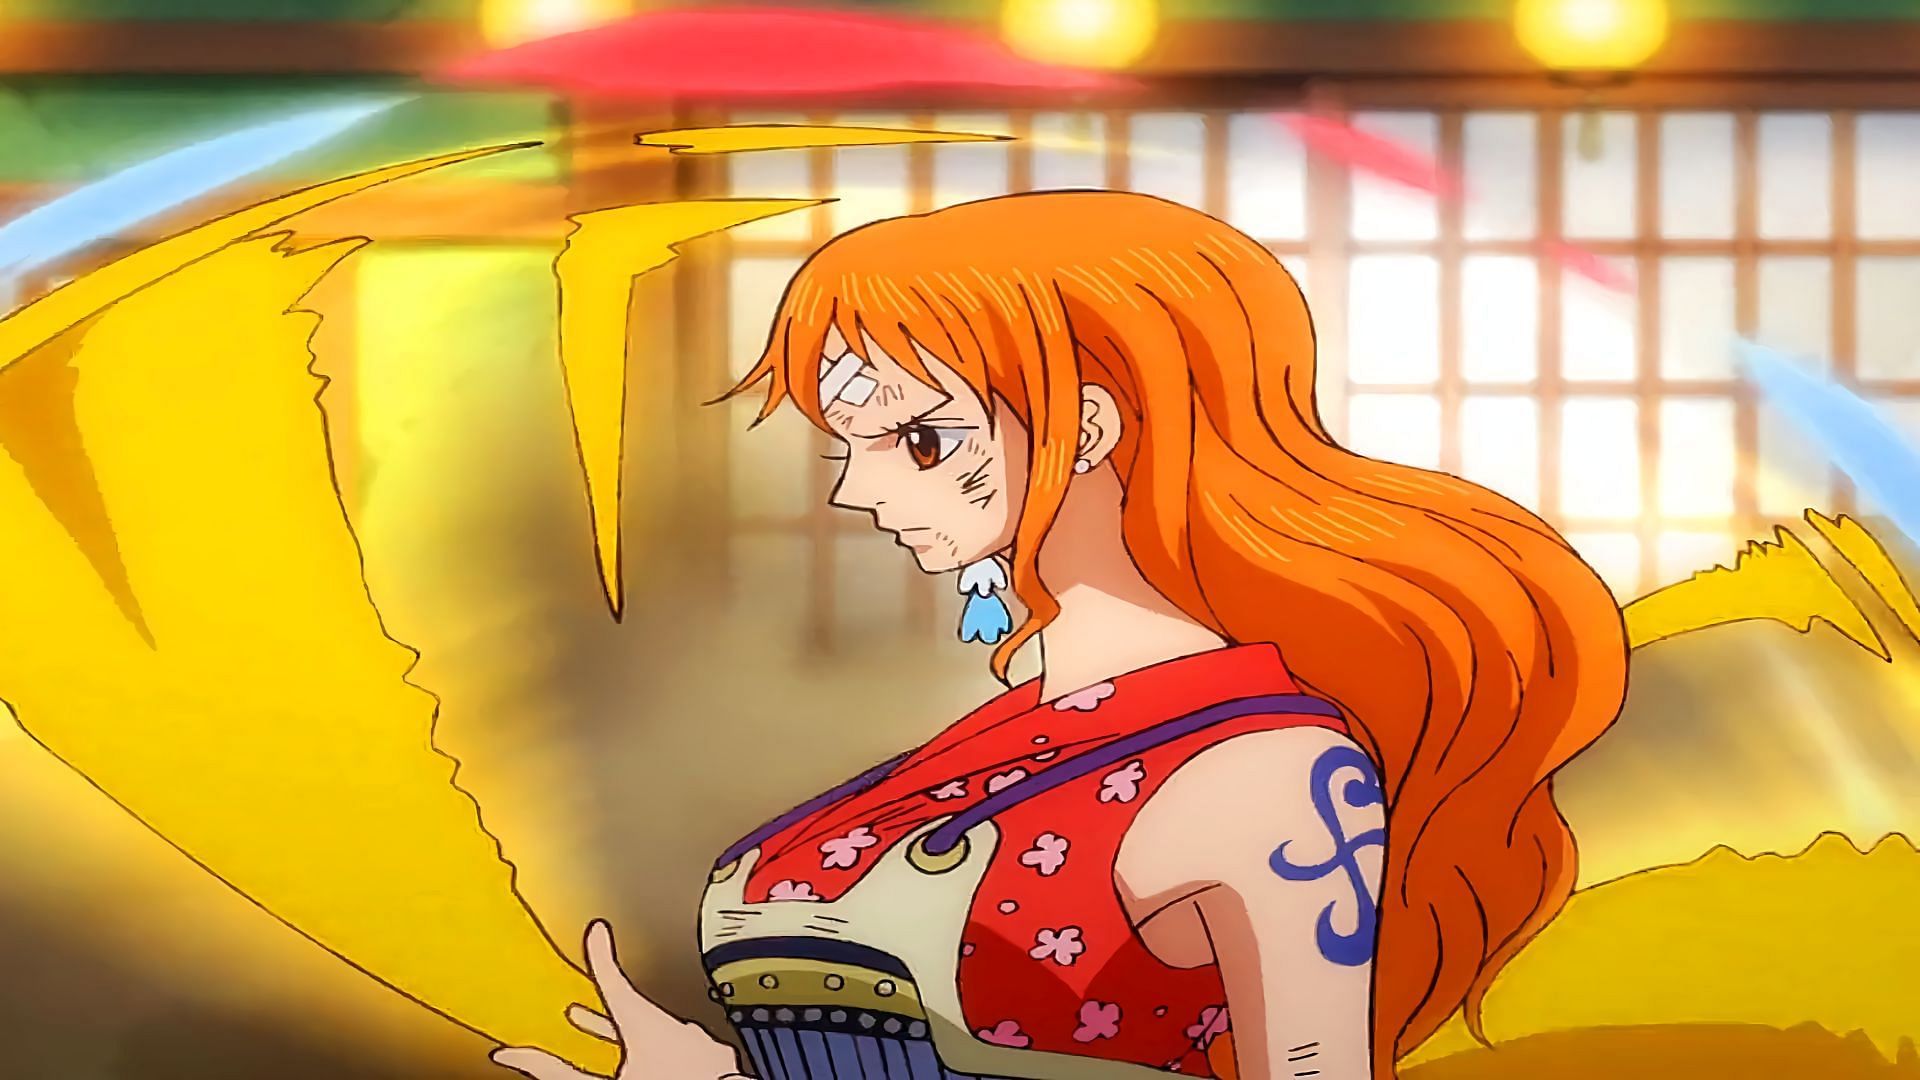 Nami as seen in One Piece episode 1033 (Image via Toei Animation)